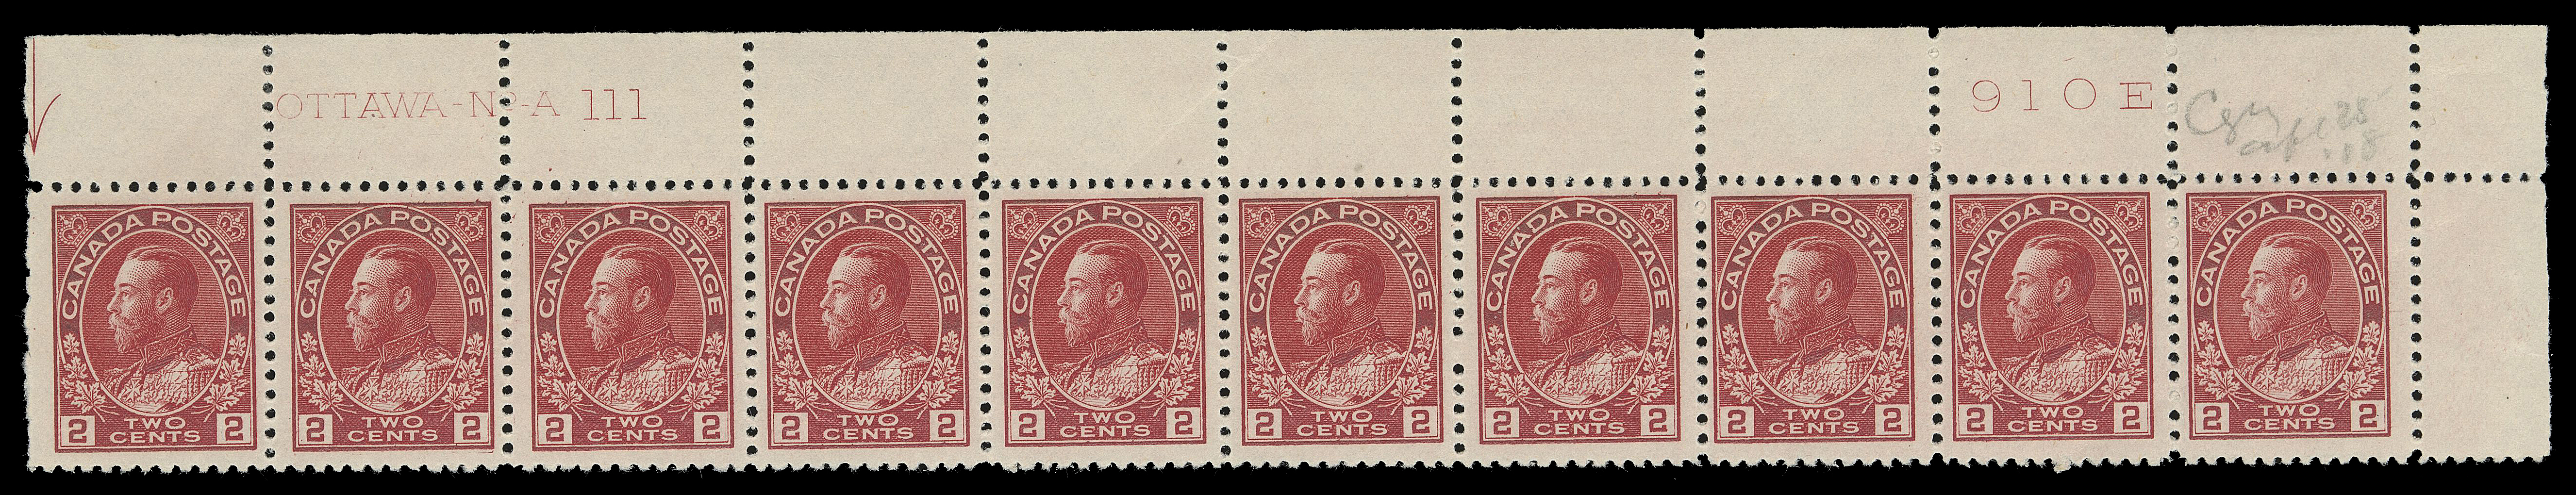 ADMIRAL STAMPS  106,A quartet of plate strips of ten with consecutive numbers – UR Plate 108, UL Plate 109, UR Plate 110 and UR Plate 111. Quite well centered with rich colour, last strip has natural gum crease on right pair, each with pencil date of acquisition, VF. (Unitrade cat. $4,800)